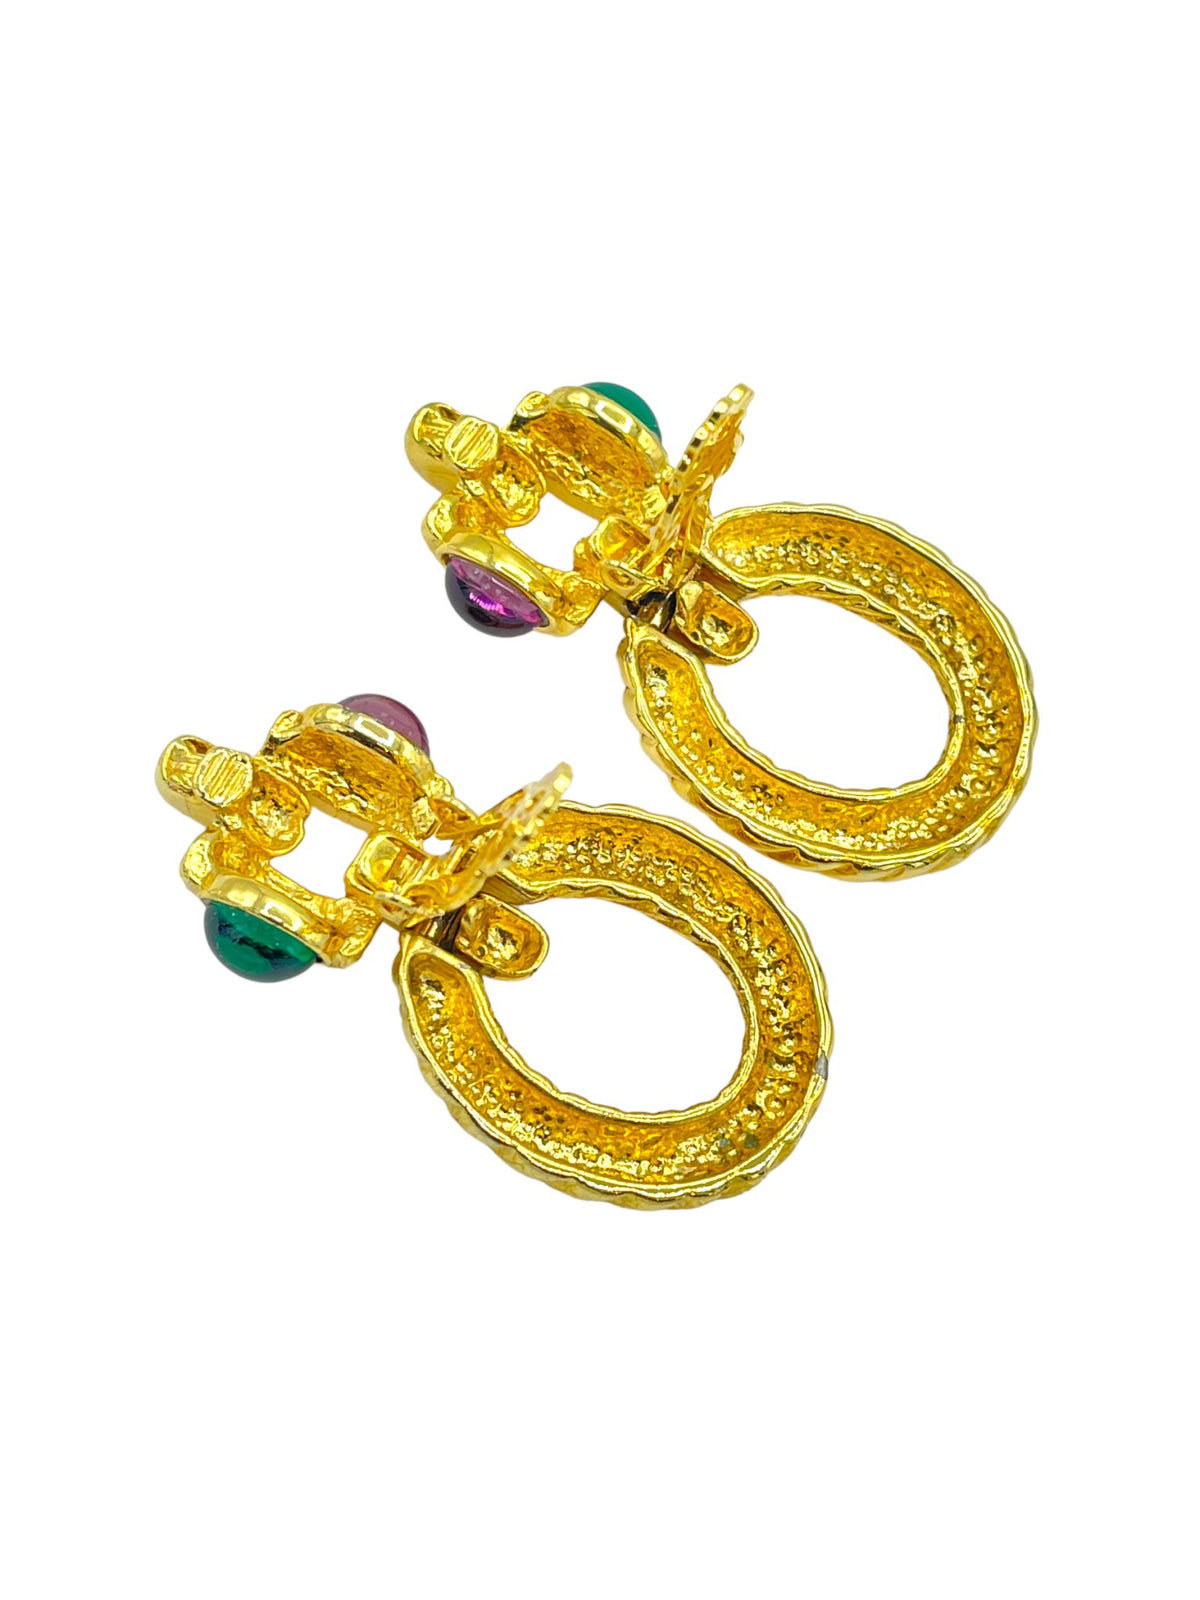 Gold Gripox Green & Purple Cabochon Rhinestone Clip-On Earrings - 24 Wishes Vintage Jewelry